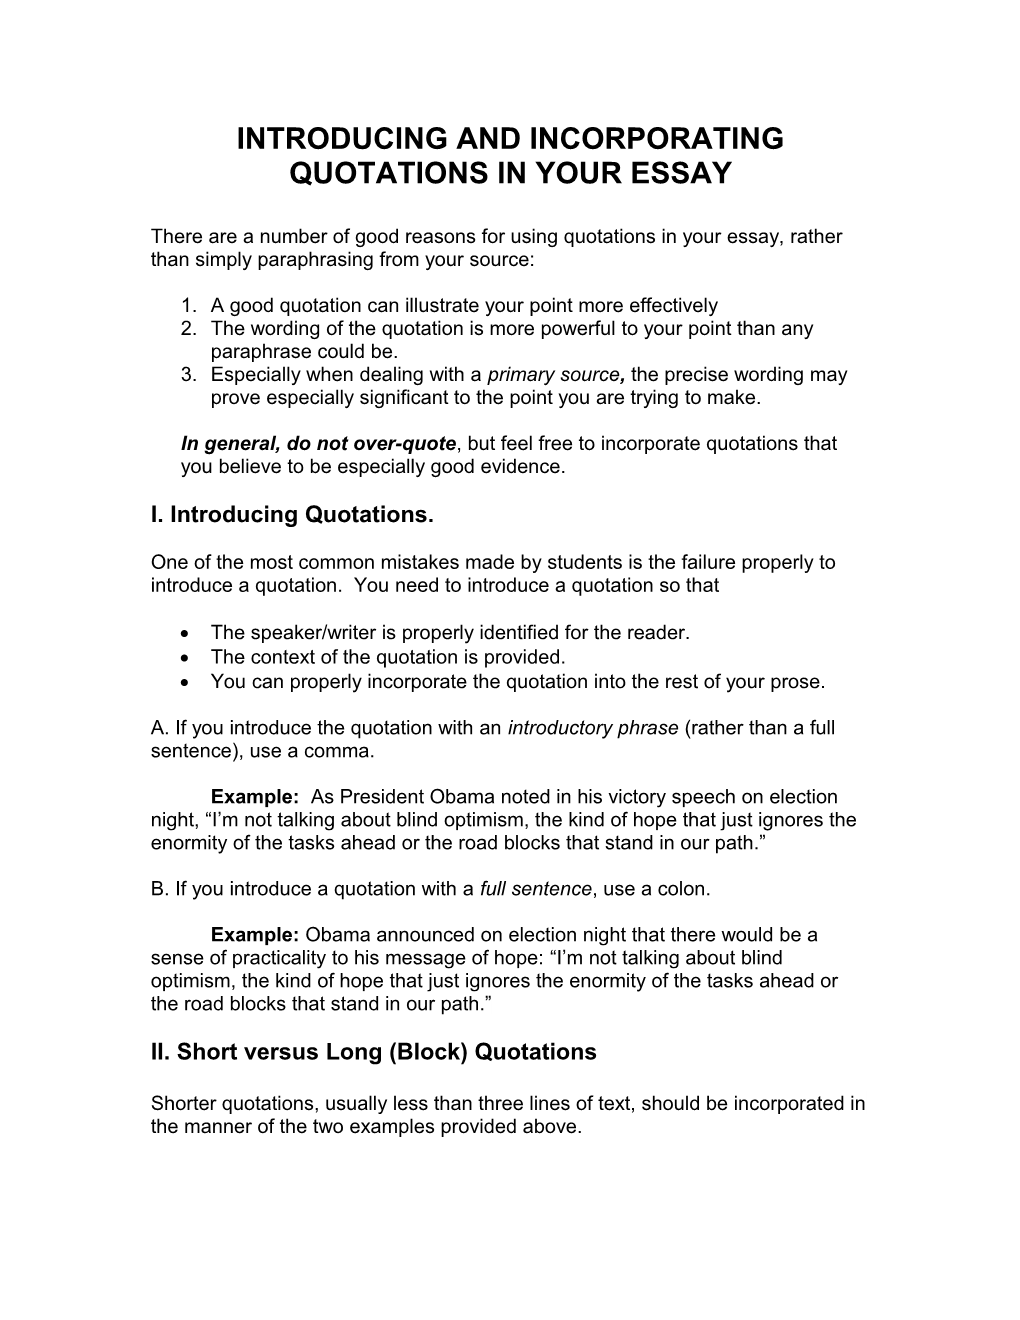 Introducing and Incorporating Quotations in Your Essay